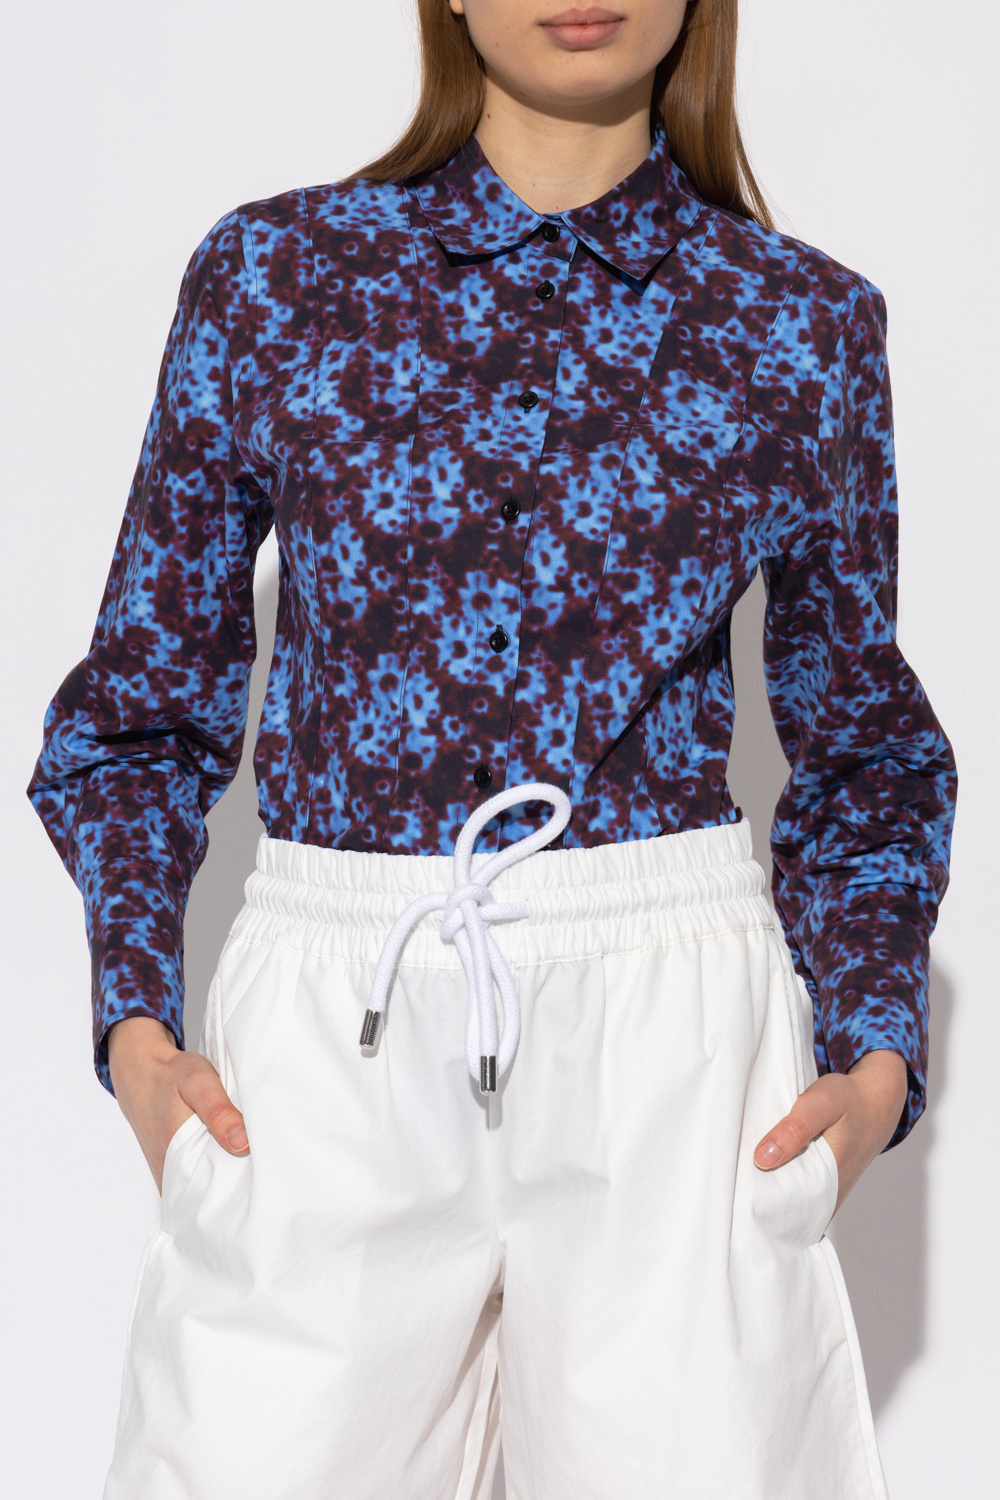 proenza from Schouler White Label Patterned shirt